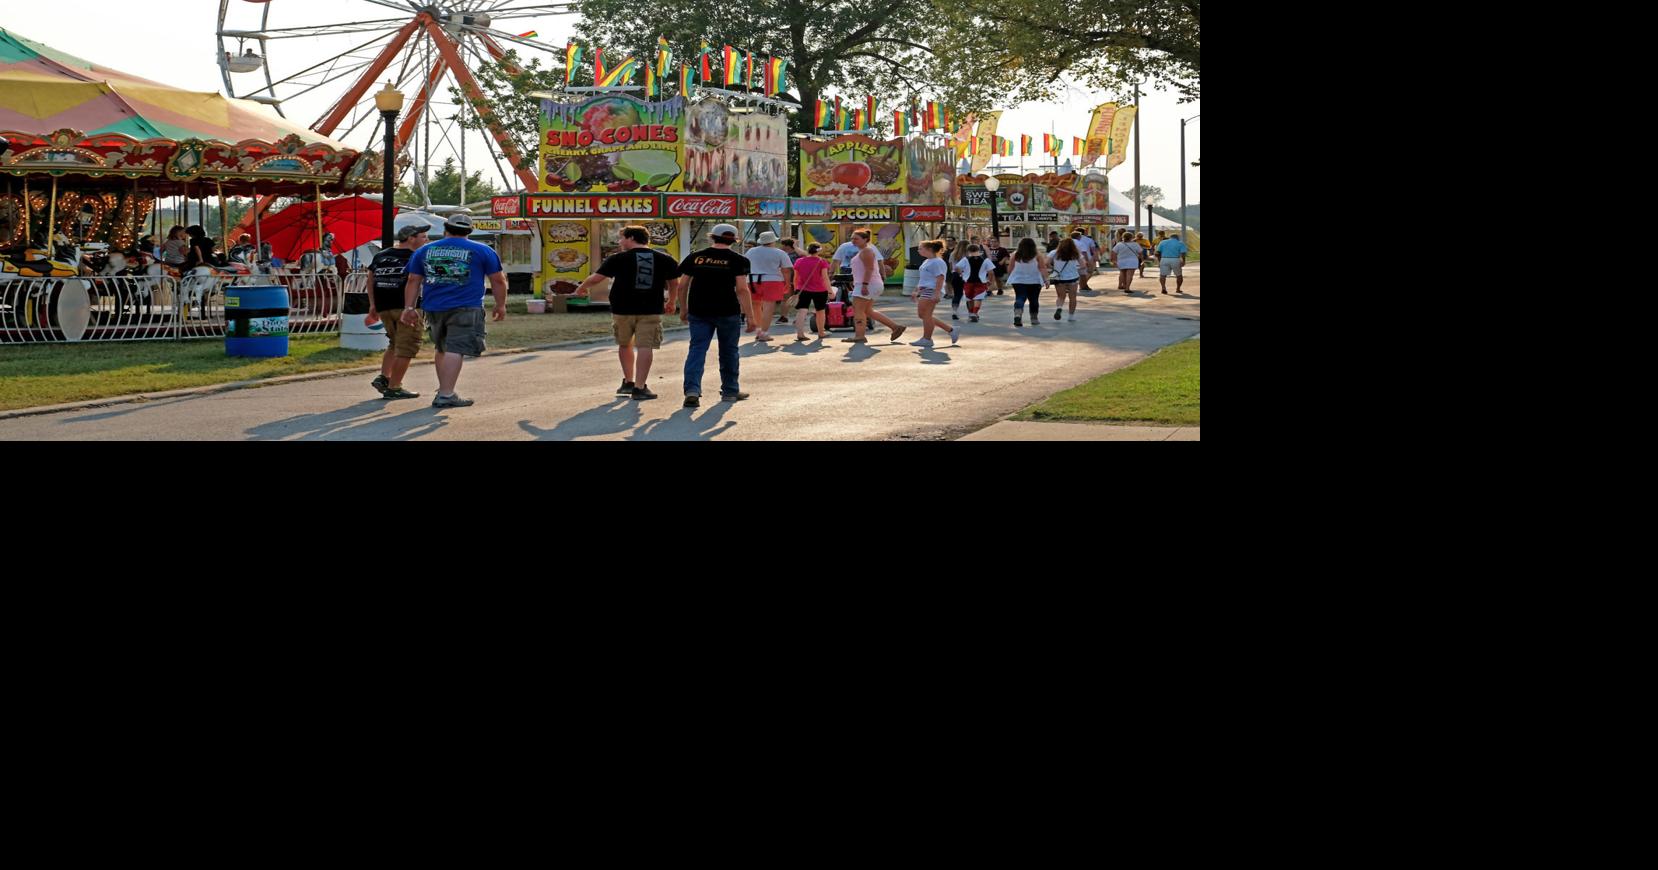 Illinois Department of Agriculture names Sailer new State Fair Manager ...